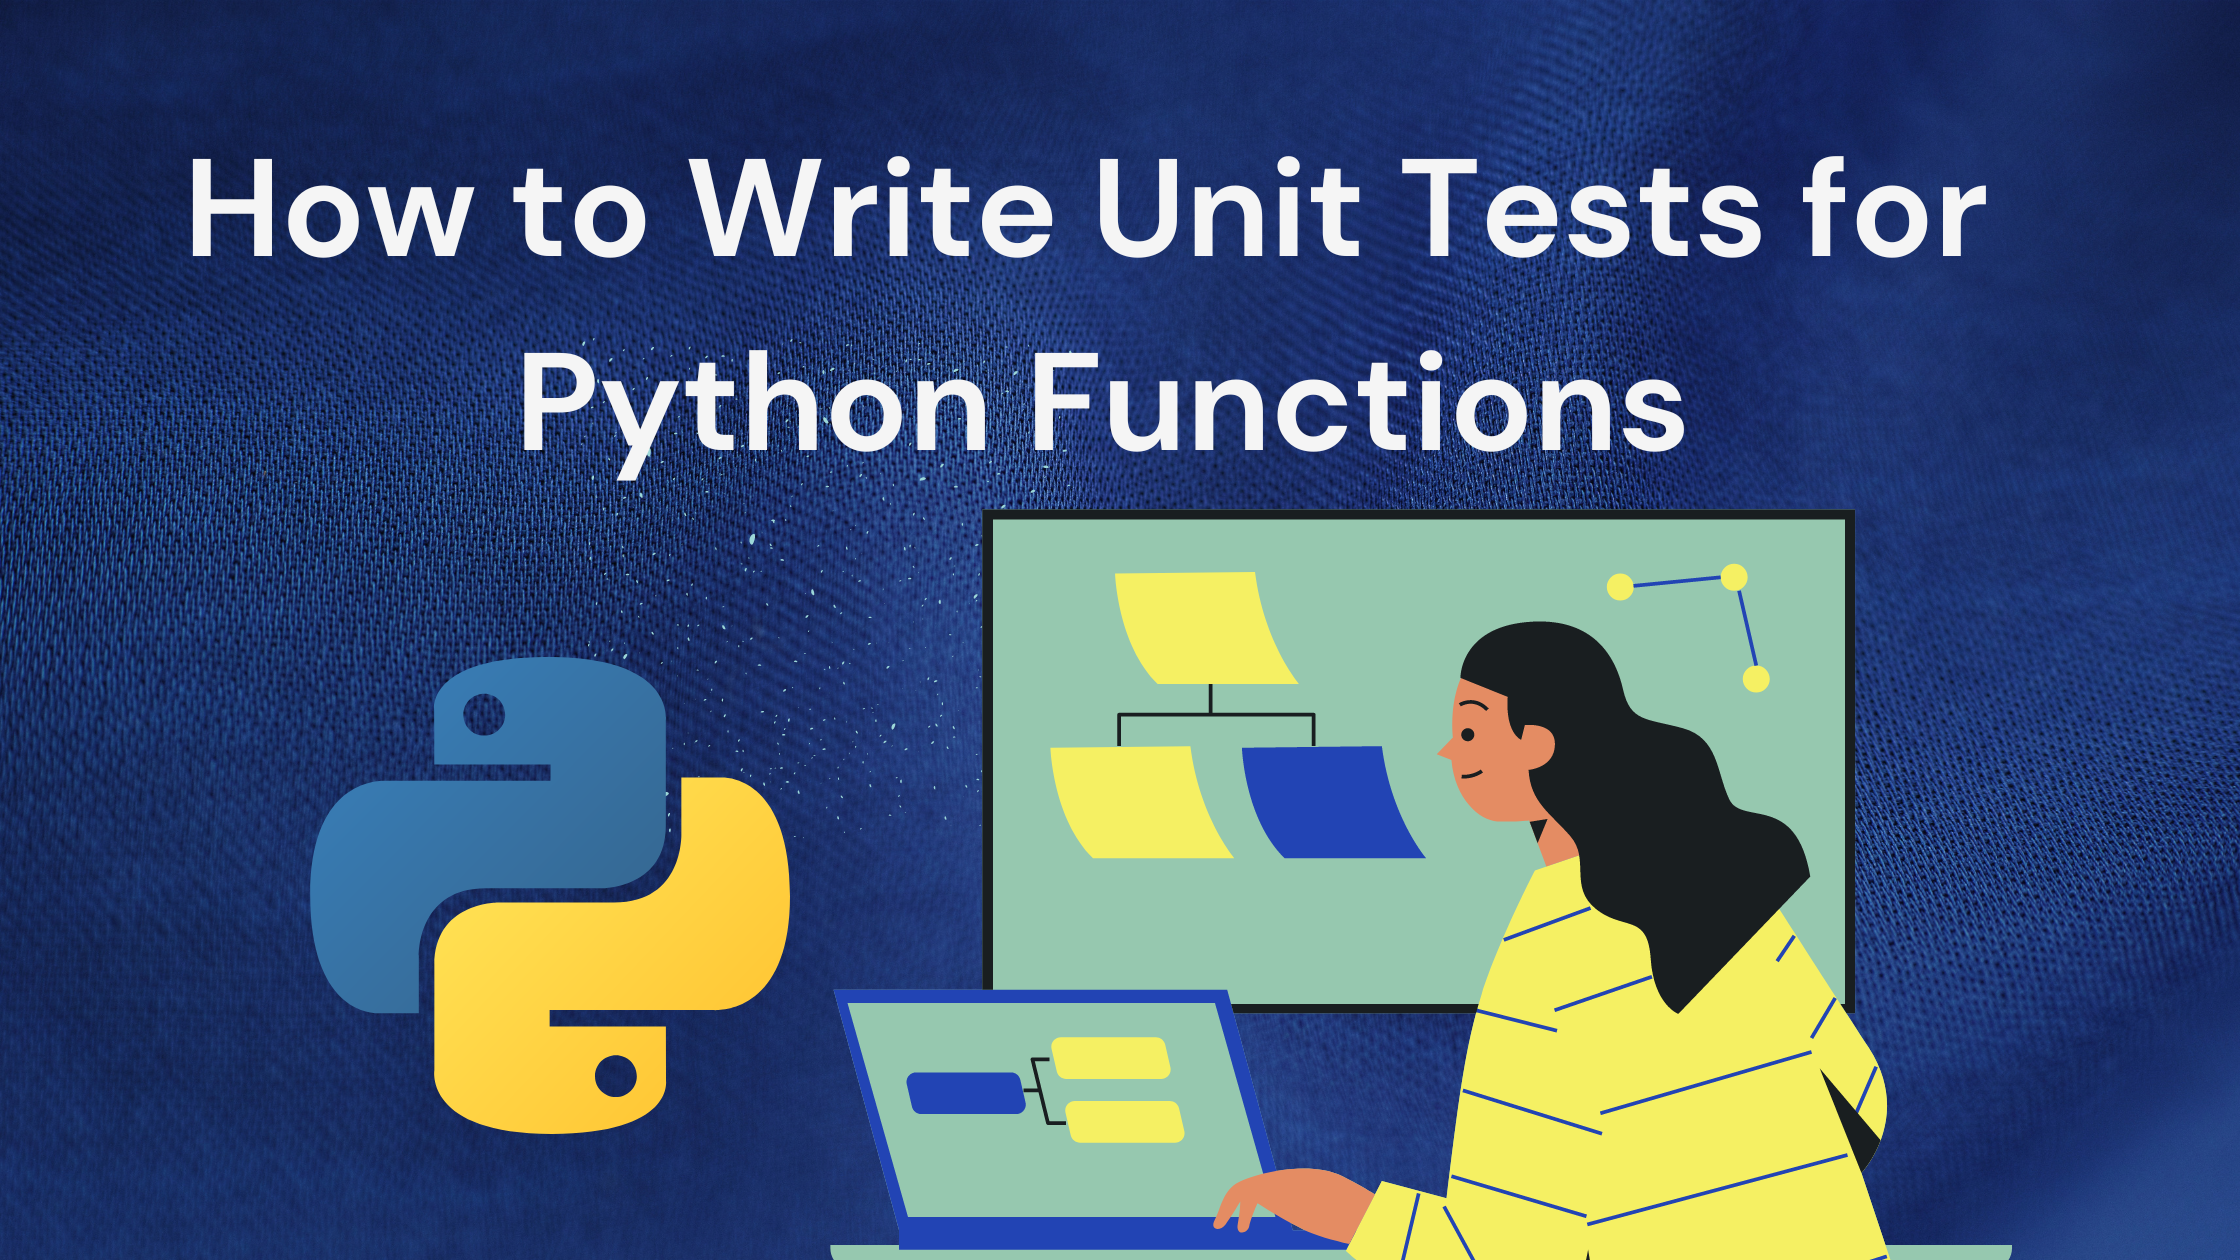 How to Write Unit Tests for Python Functions